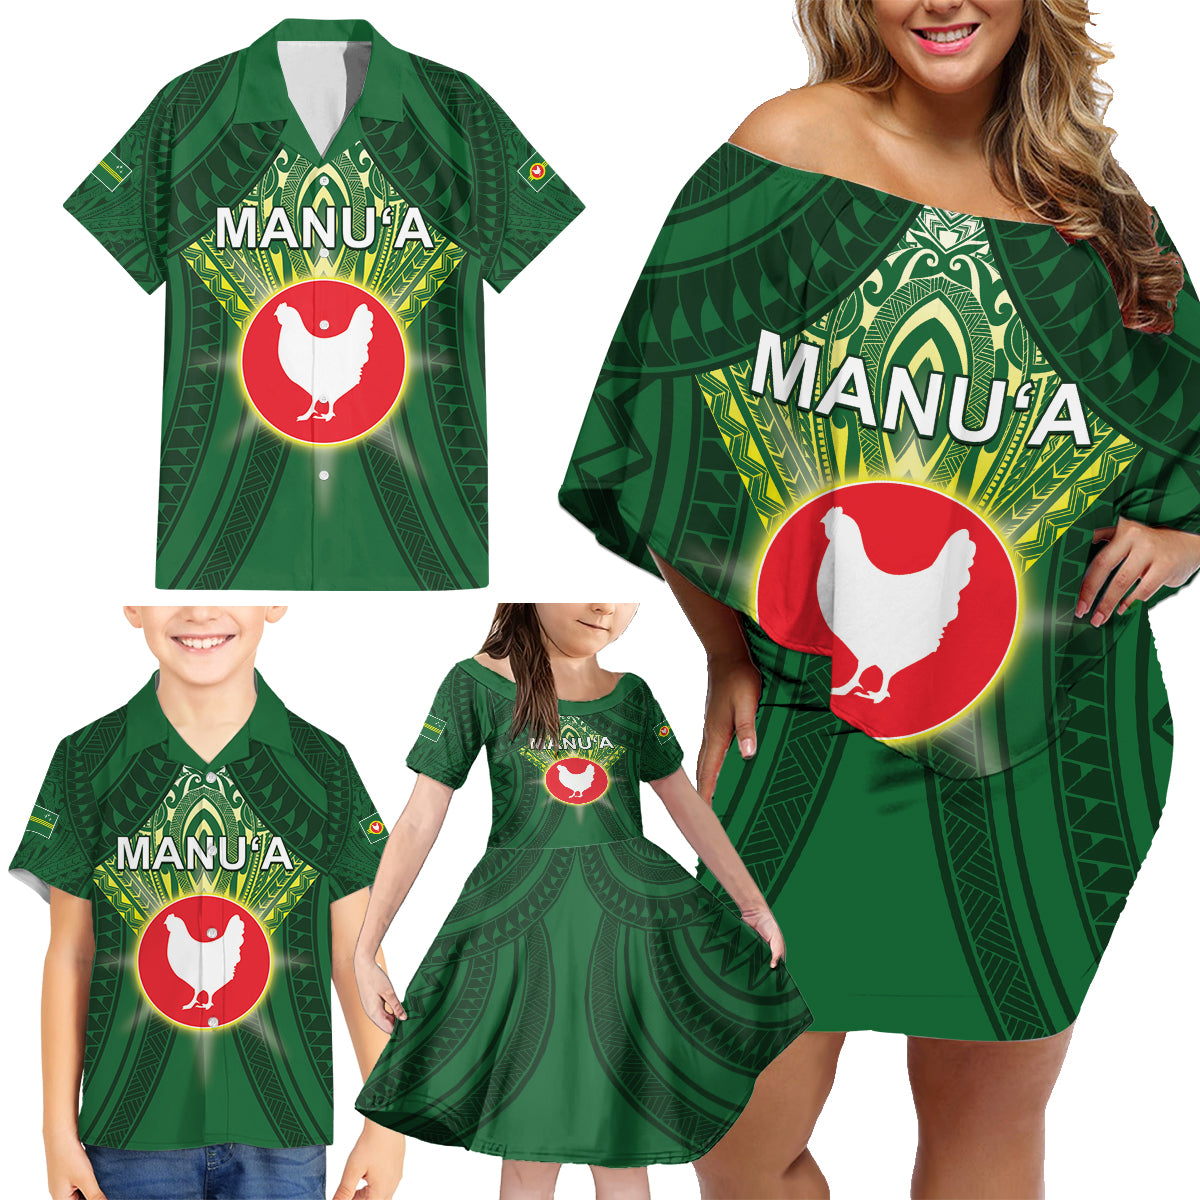 Personalized American Samoa Manu'a Cession Day Family Matching Off Shoulder Short Dress and Hawaiian Shirt With Polynesian Pattern